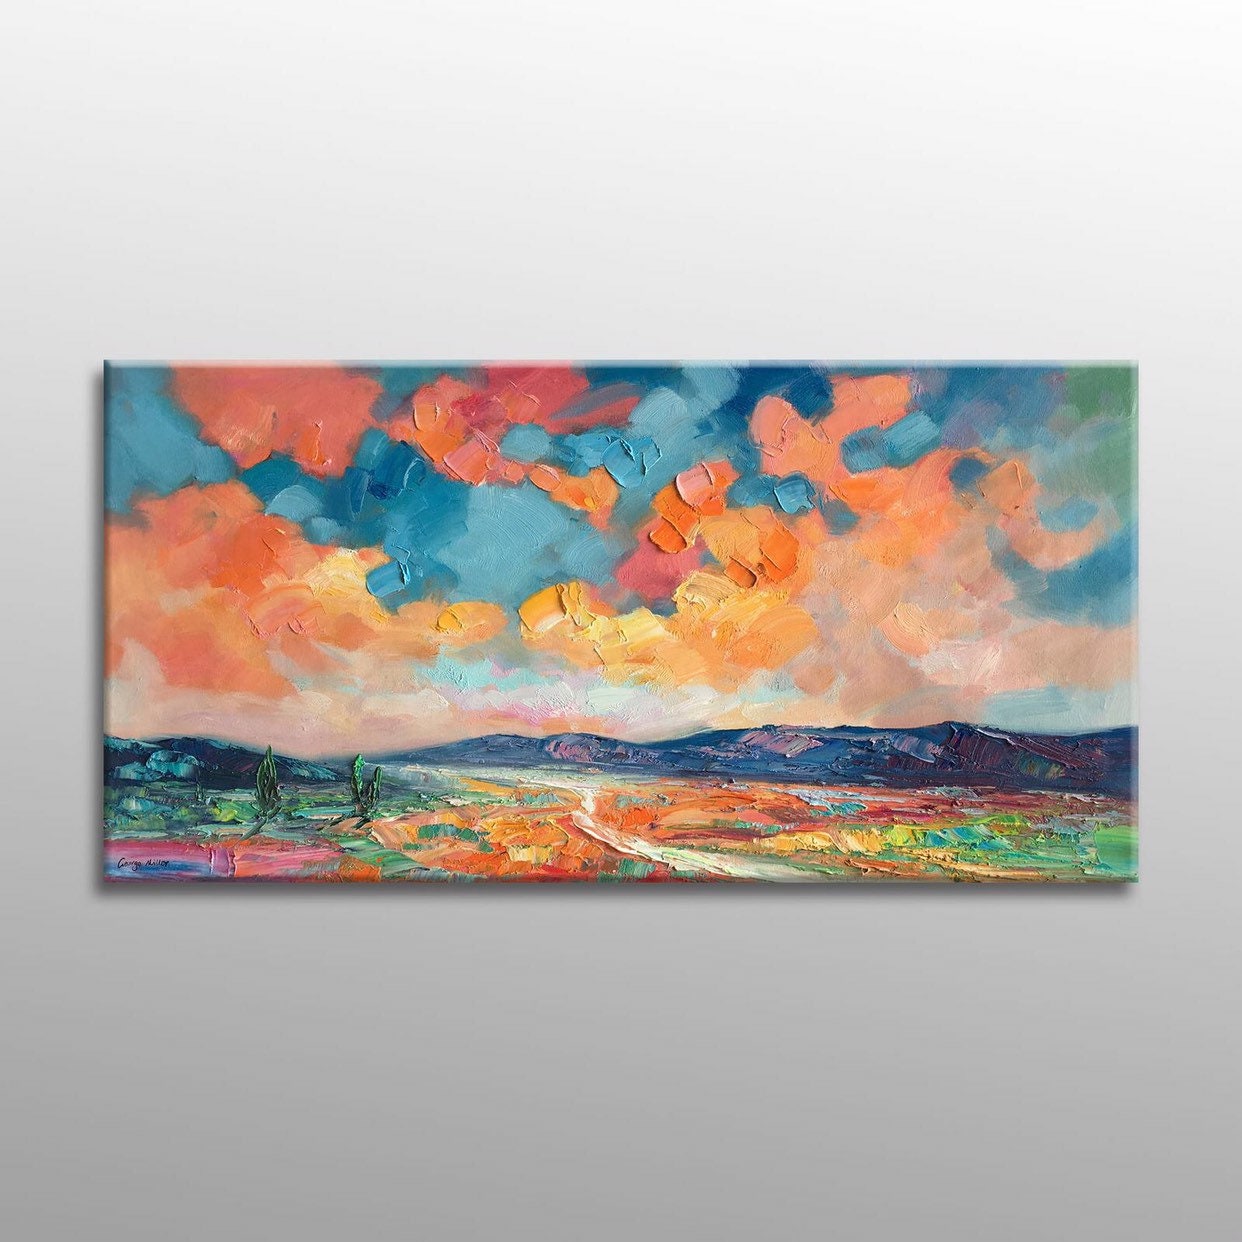 Canvas Painting, Abstract Art, Large Painting, Original Artwork, Canvas Wall Decor, Contemporary Painting, Abstract Landscape Painting